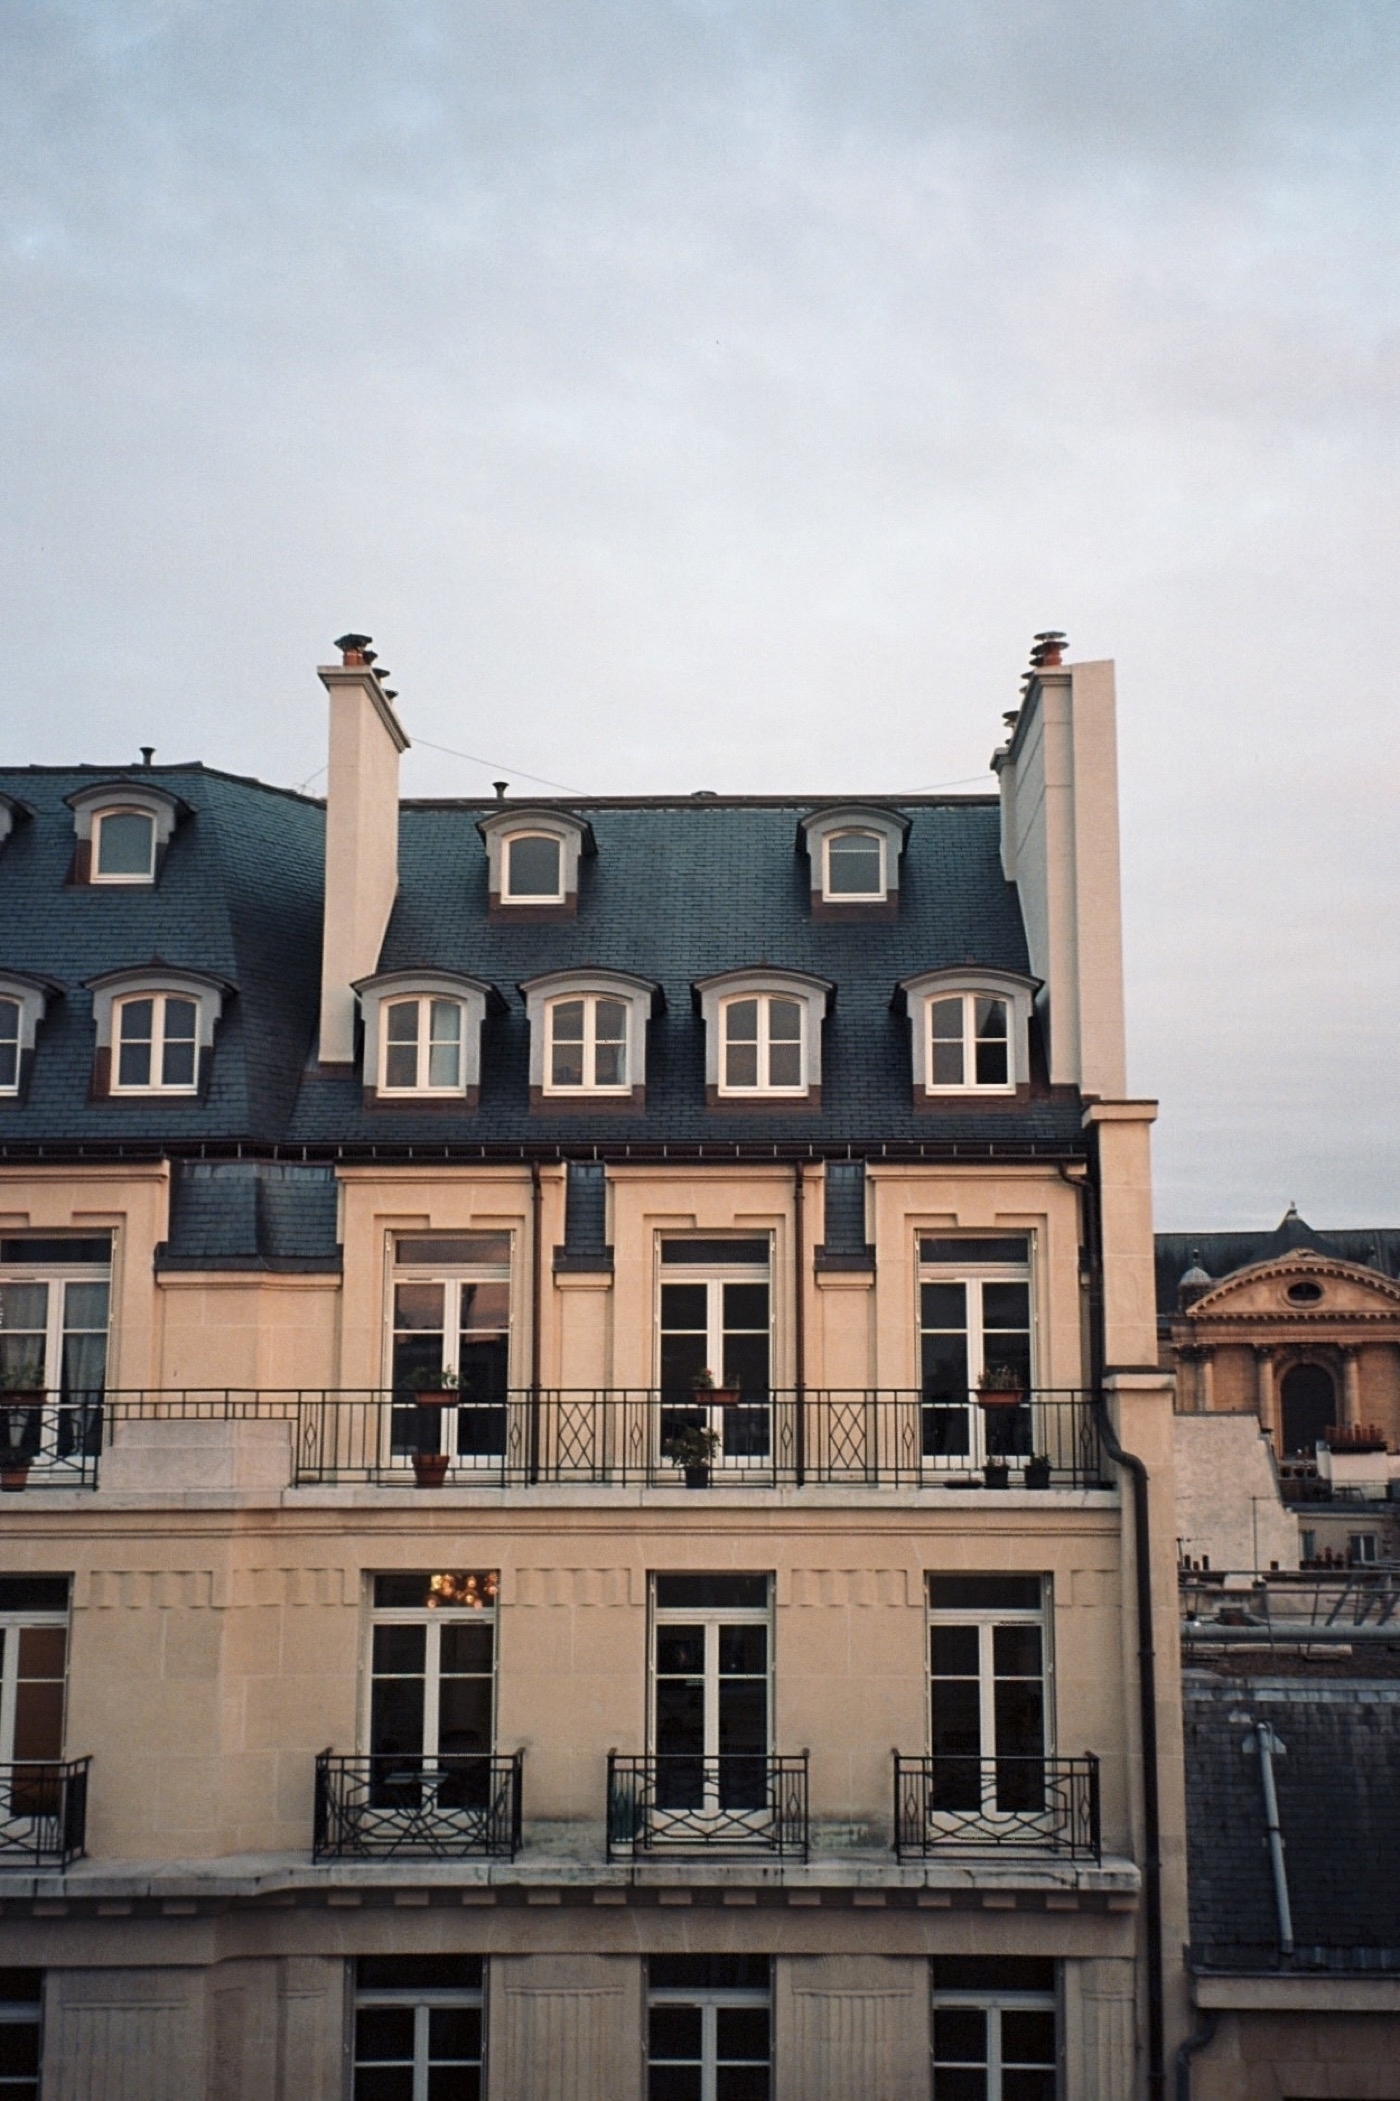 Building in Sanit Germaine. Photo taken with Leica Z2X in Paris by Josh Withers.